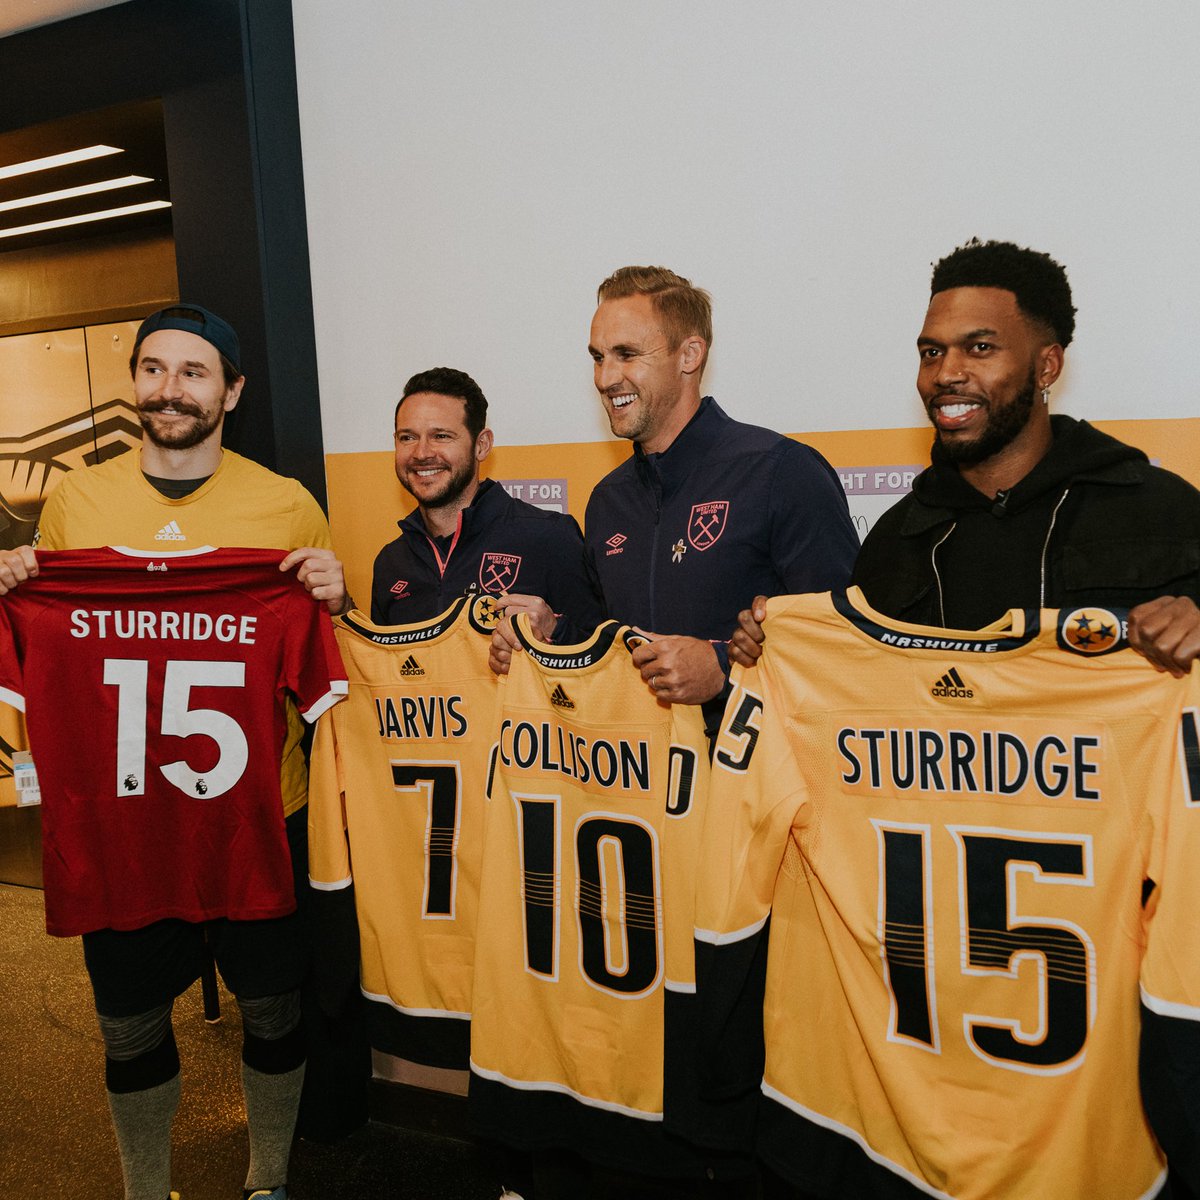 When the @premierleague meets the @NHL 🤝 Daniel Sturridge, Jack Collison, and Matt Jarvis hit the ice to hang with the @PredsNHL 🏒⚽️